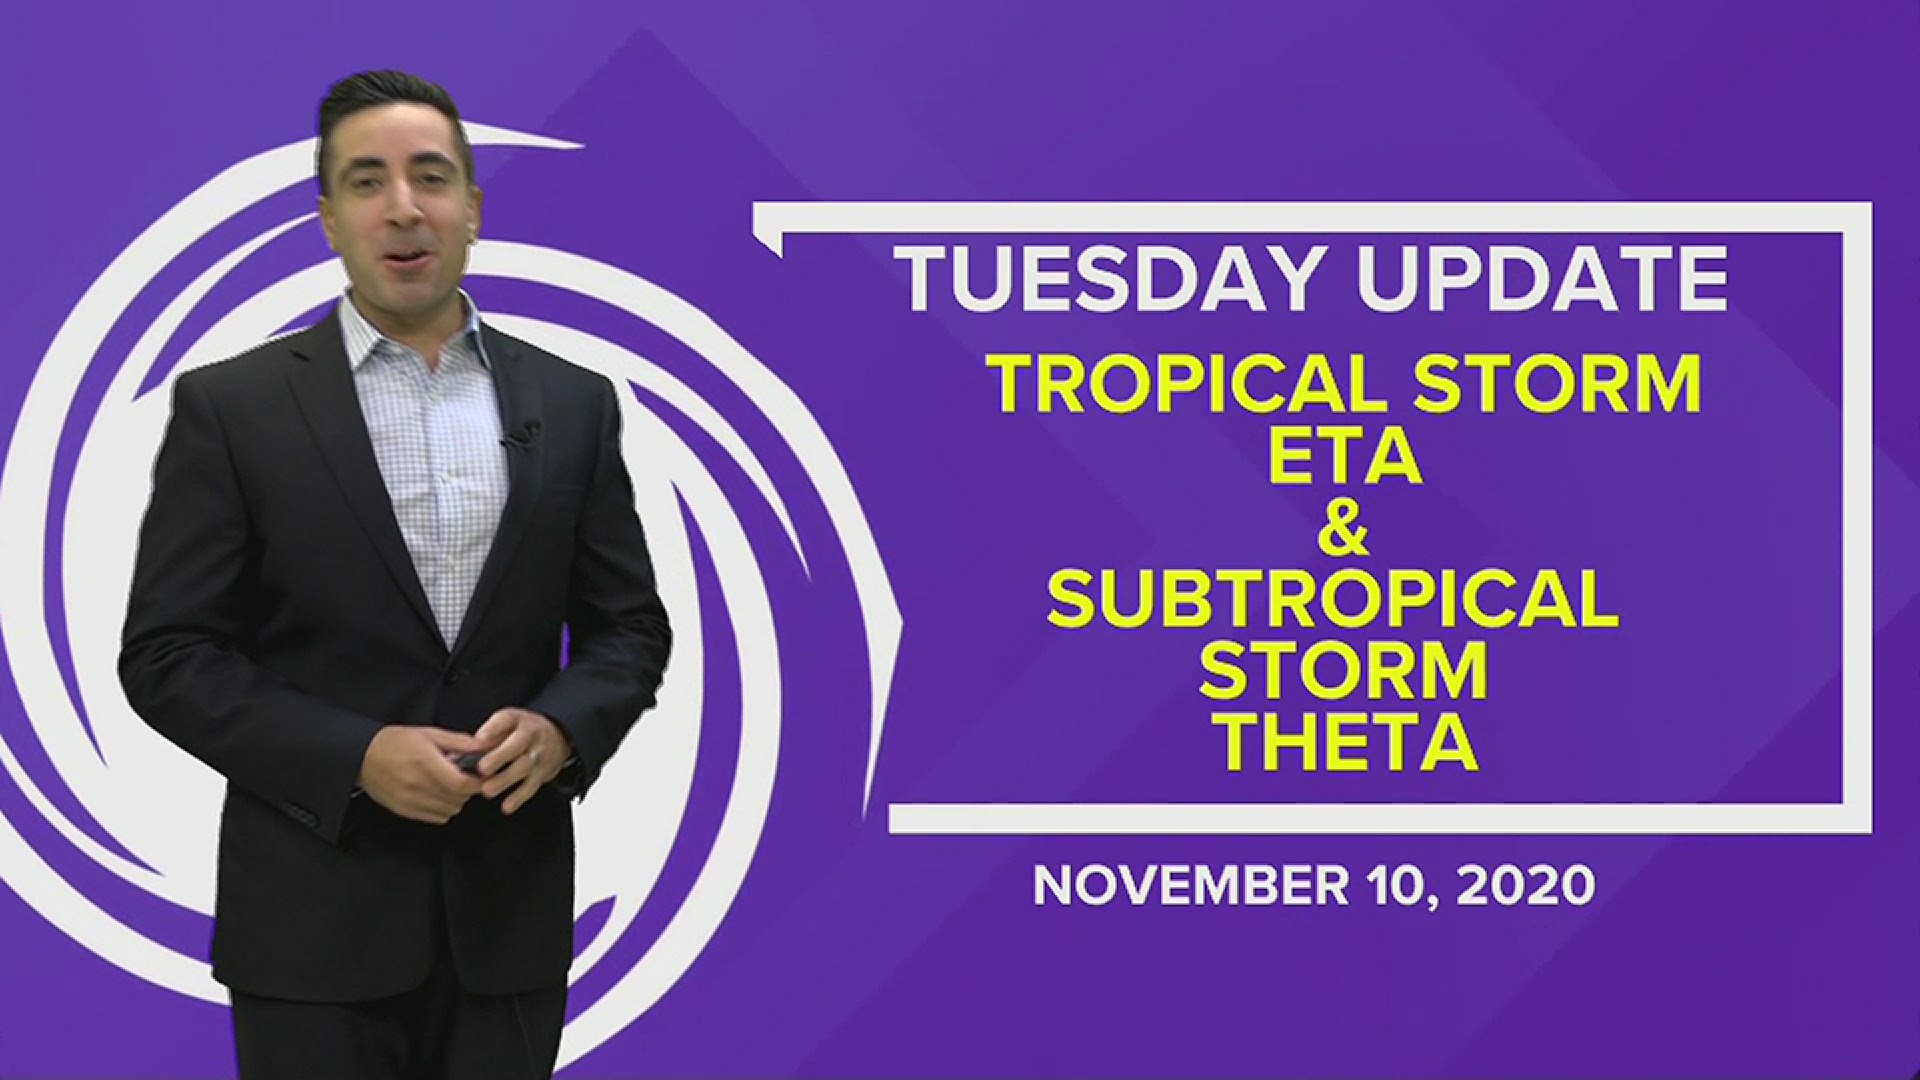 13News Now Meteorologist Tim Pandajis has the latest on Tropical Storm Eta and Subtropical Storm Theta and another system that could become Iota.